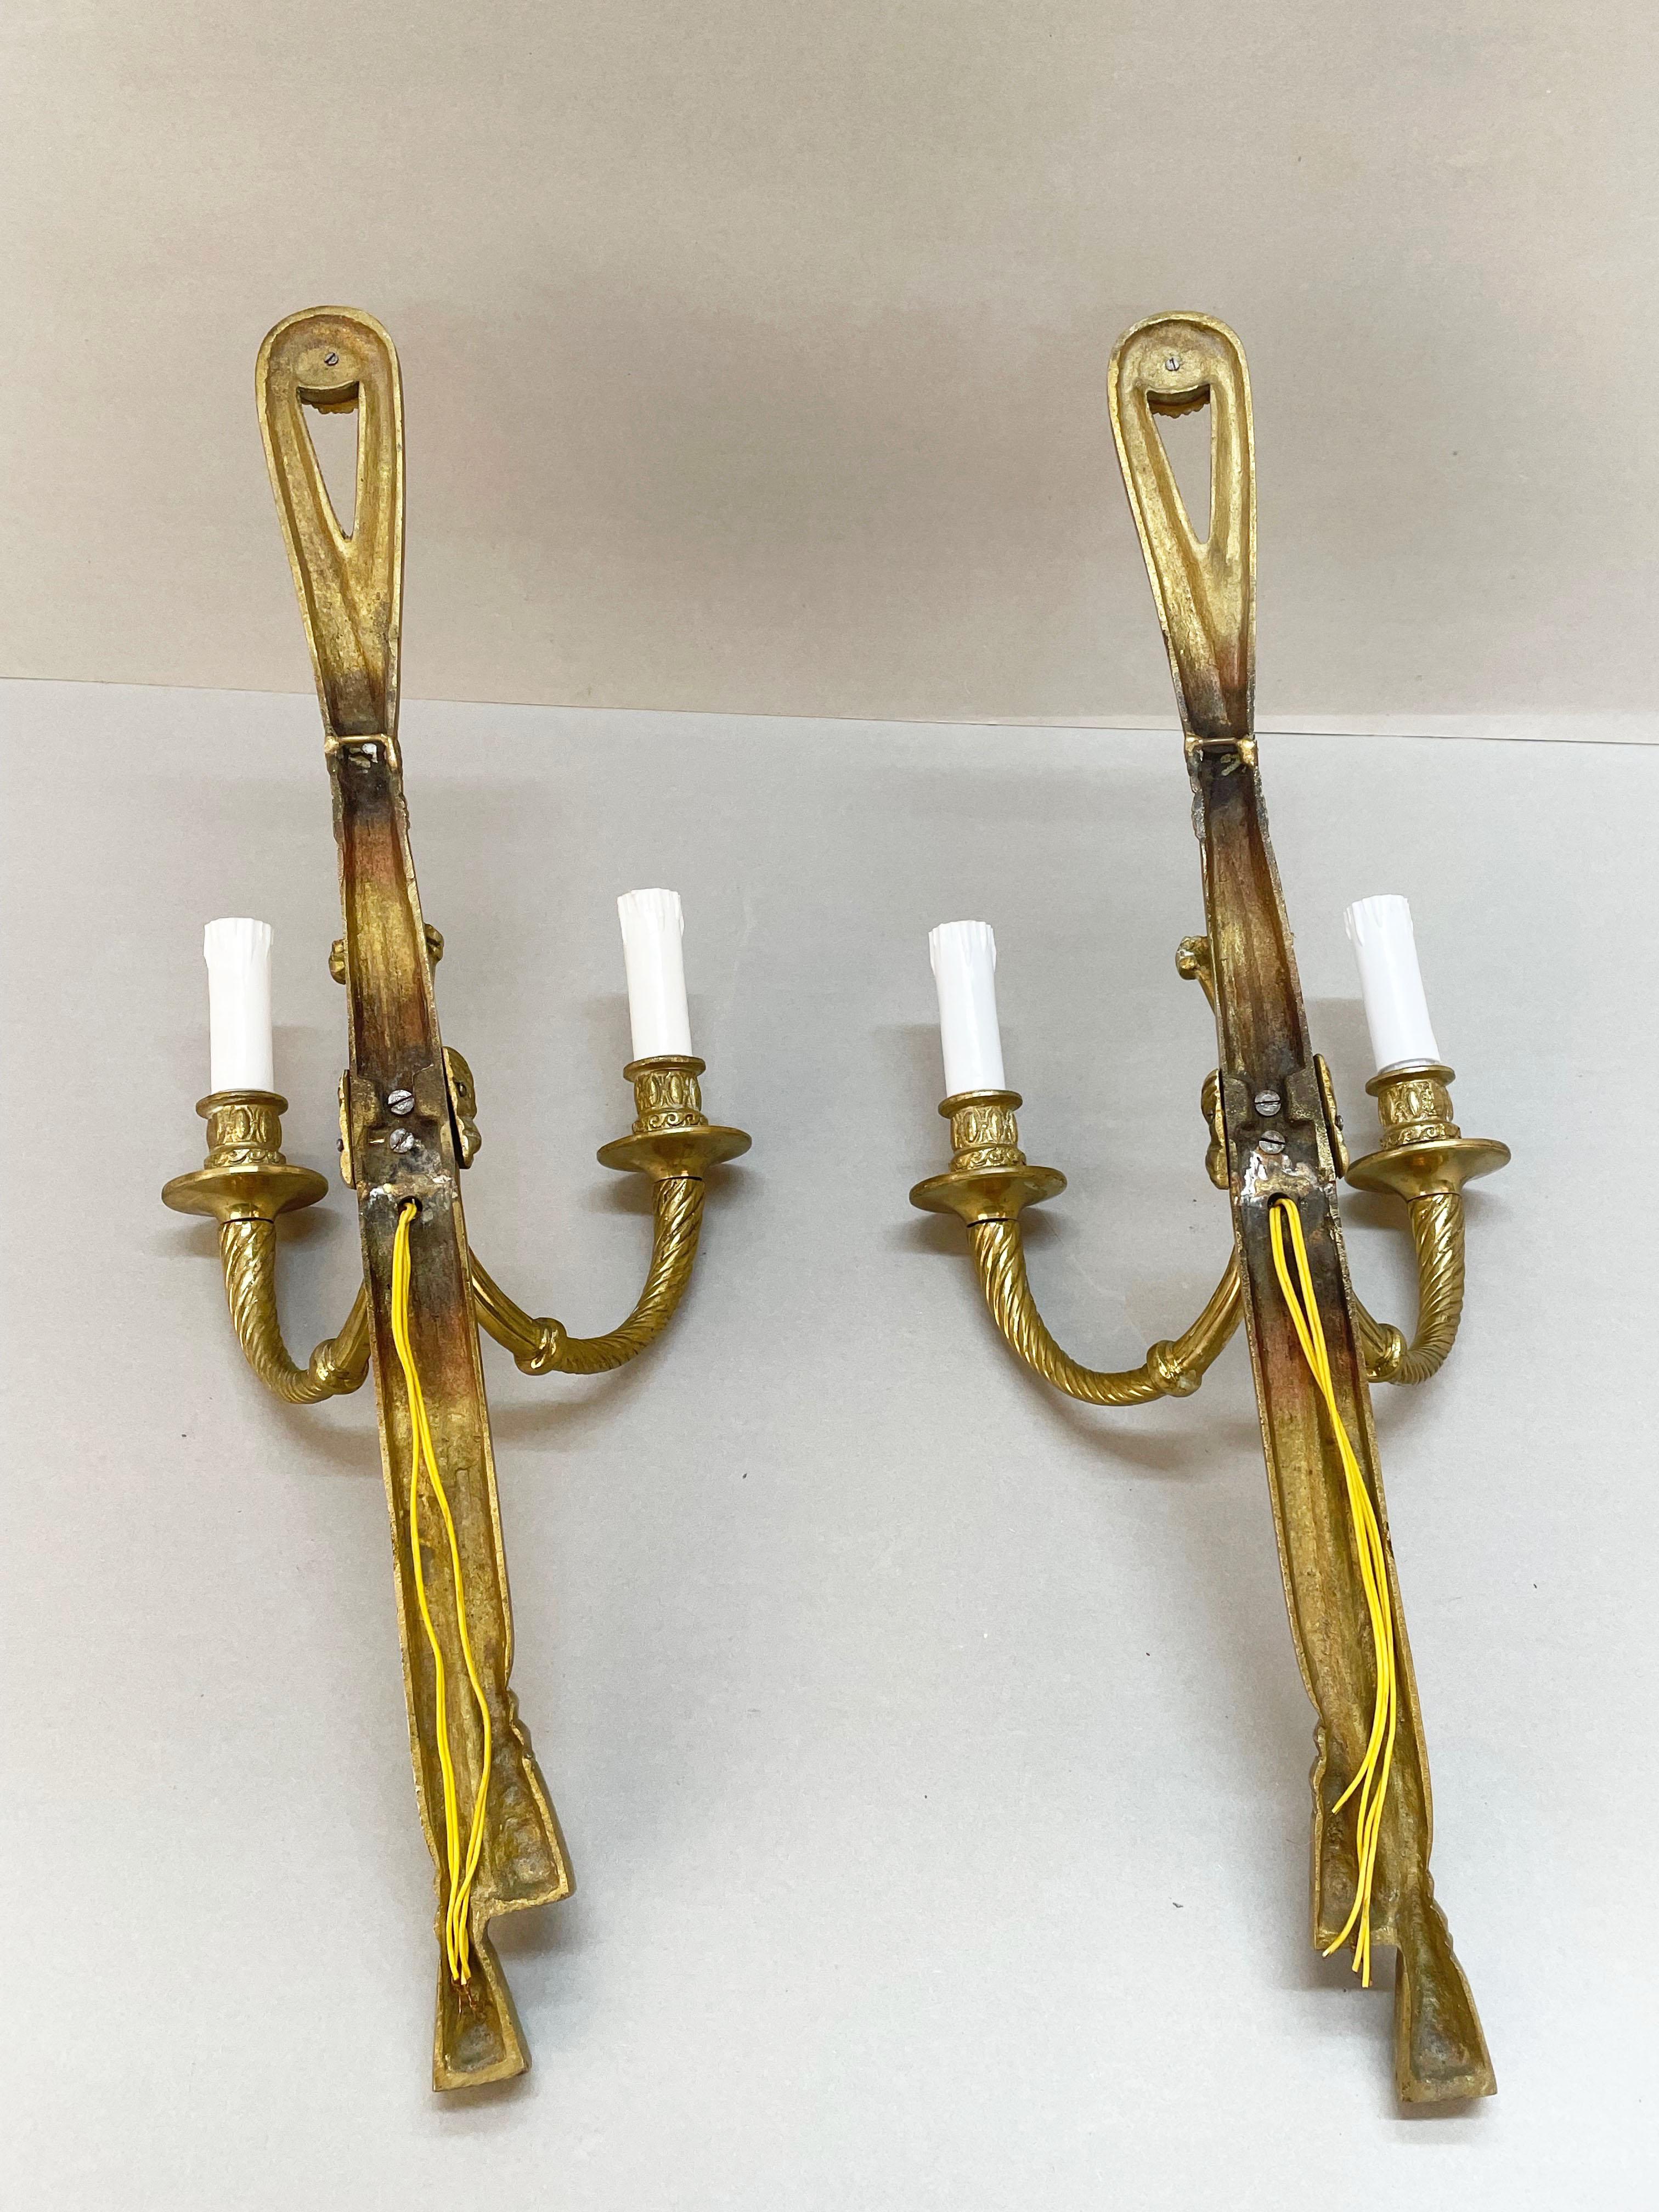 Pair of 19th Century Louis XVI Style Knot & Tassel Appliqué Wall Candle Sconces For Sale 6